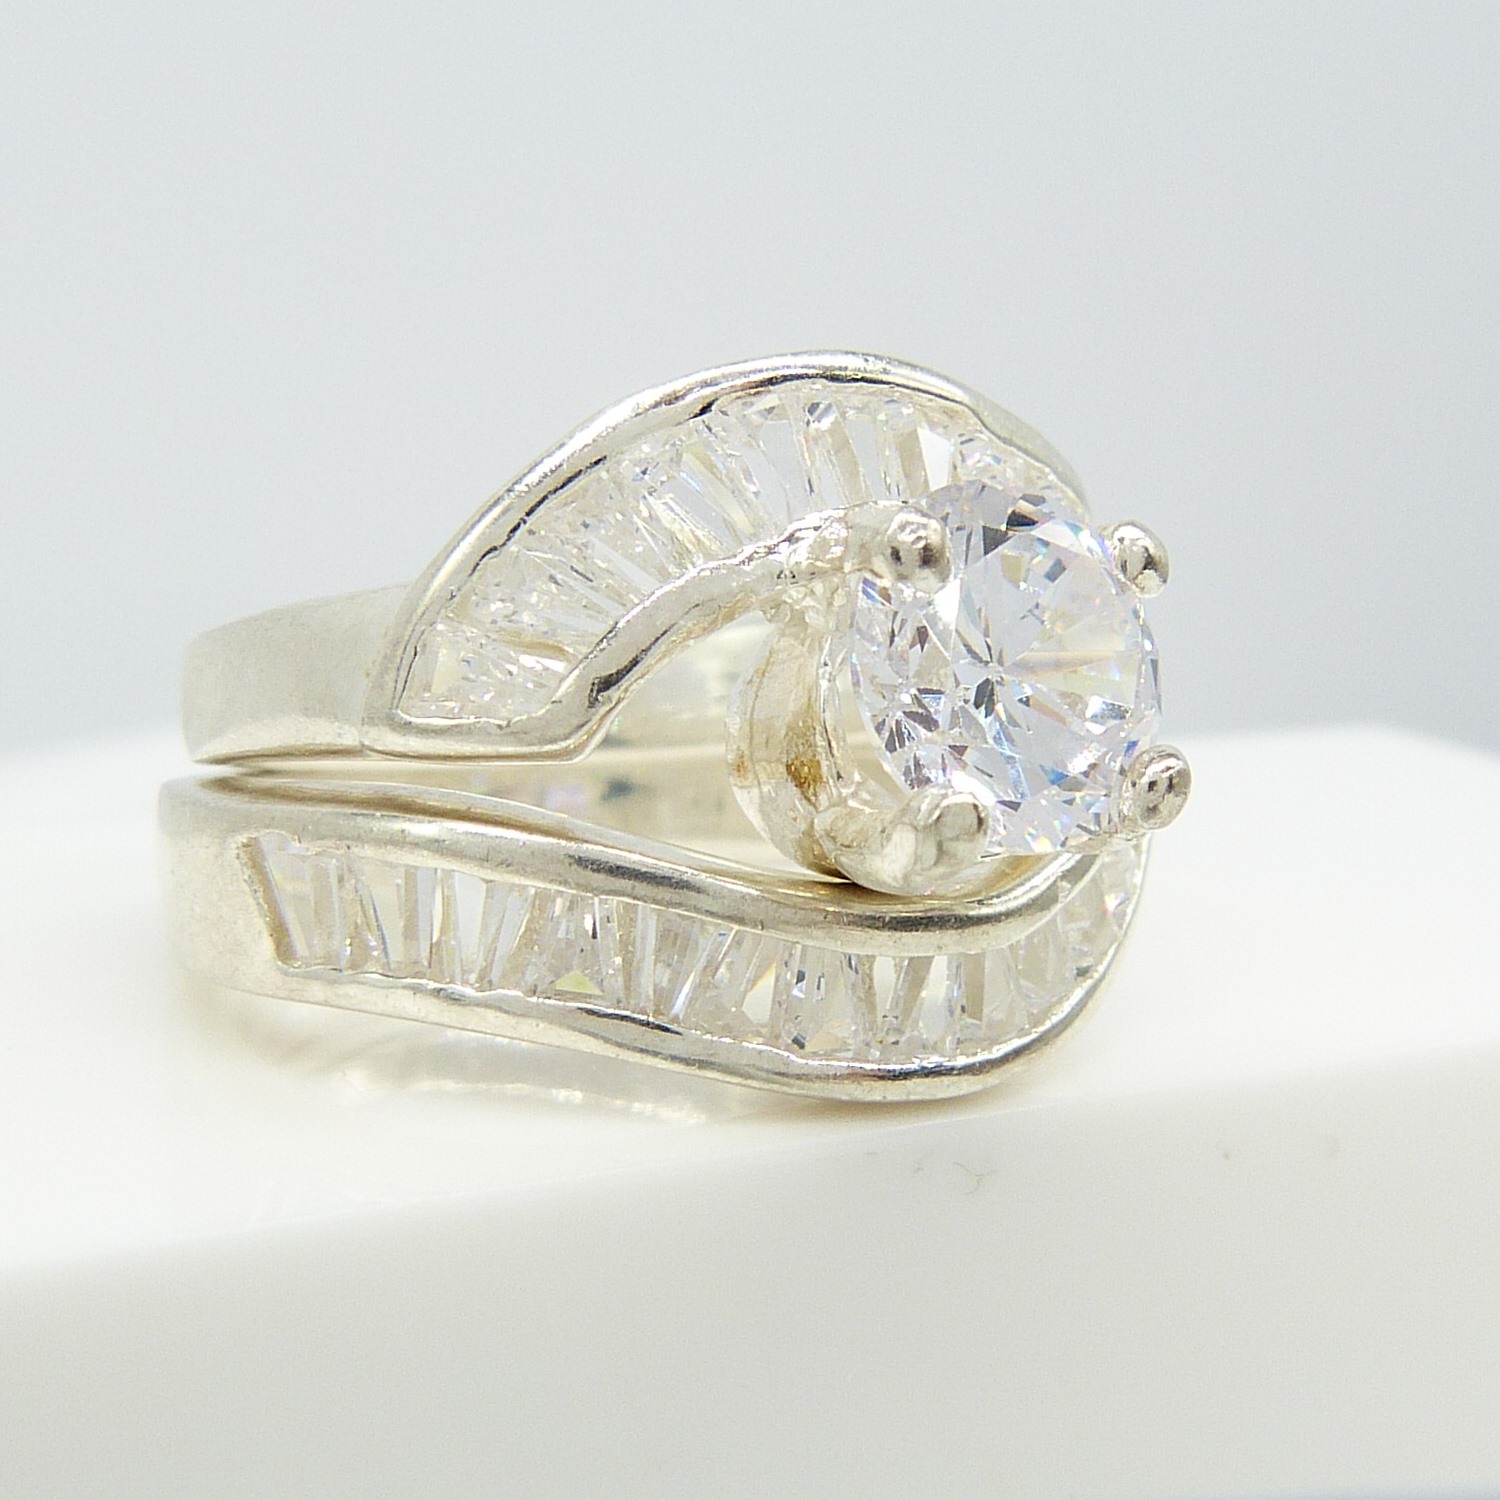 Two part cubic zirconia-set silver wave-style dress ring - Image 3 of 7